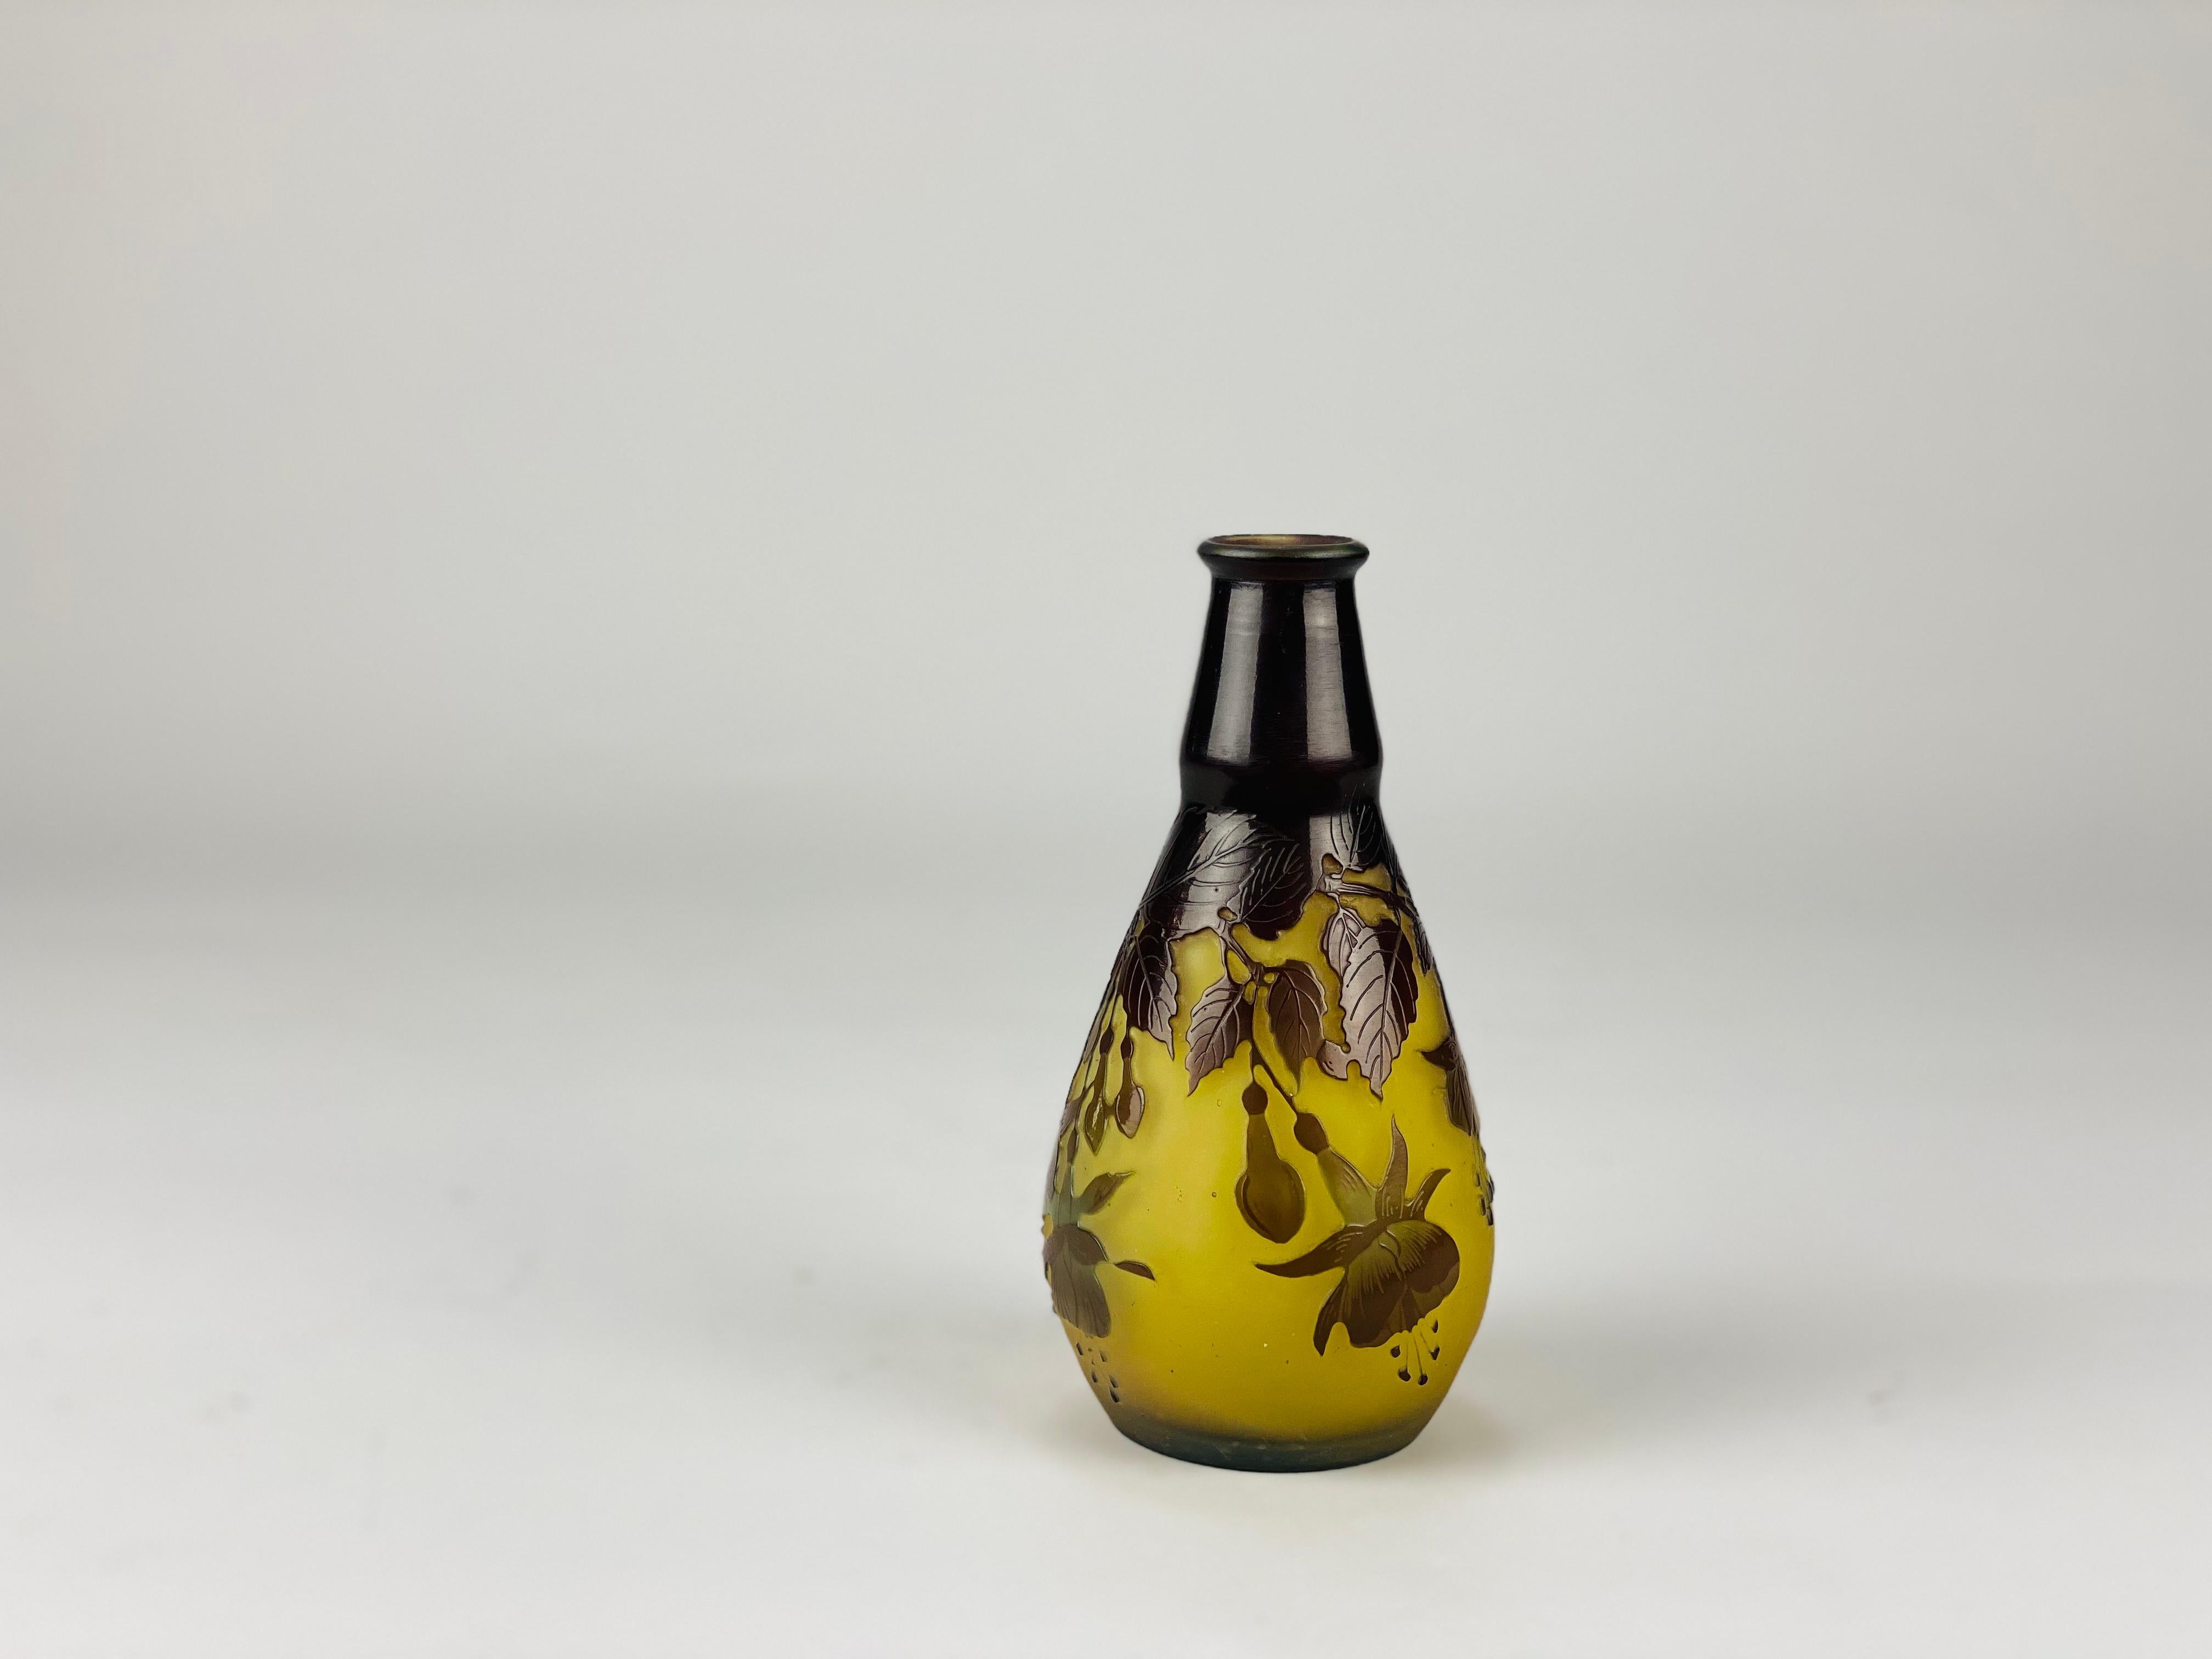 An attractive late 19th century cameo glass vase cut with decorative purple Fuchsia flowers in a landscape against a warm yellow field with excellent hand finished detail and colour, signed Galle in cameo
Additional information

height: 15.5